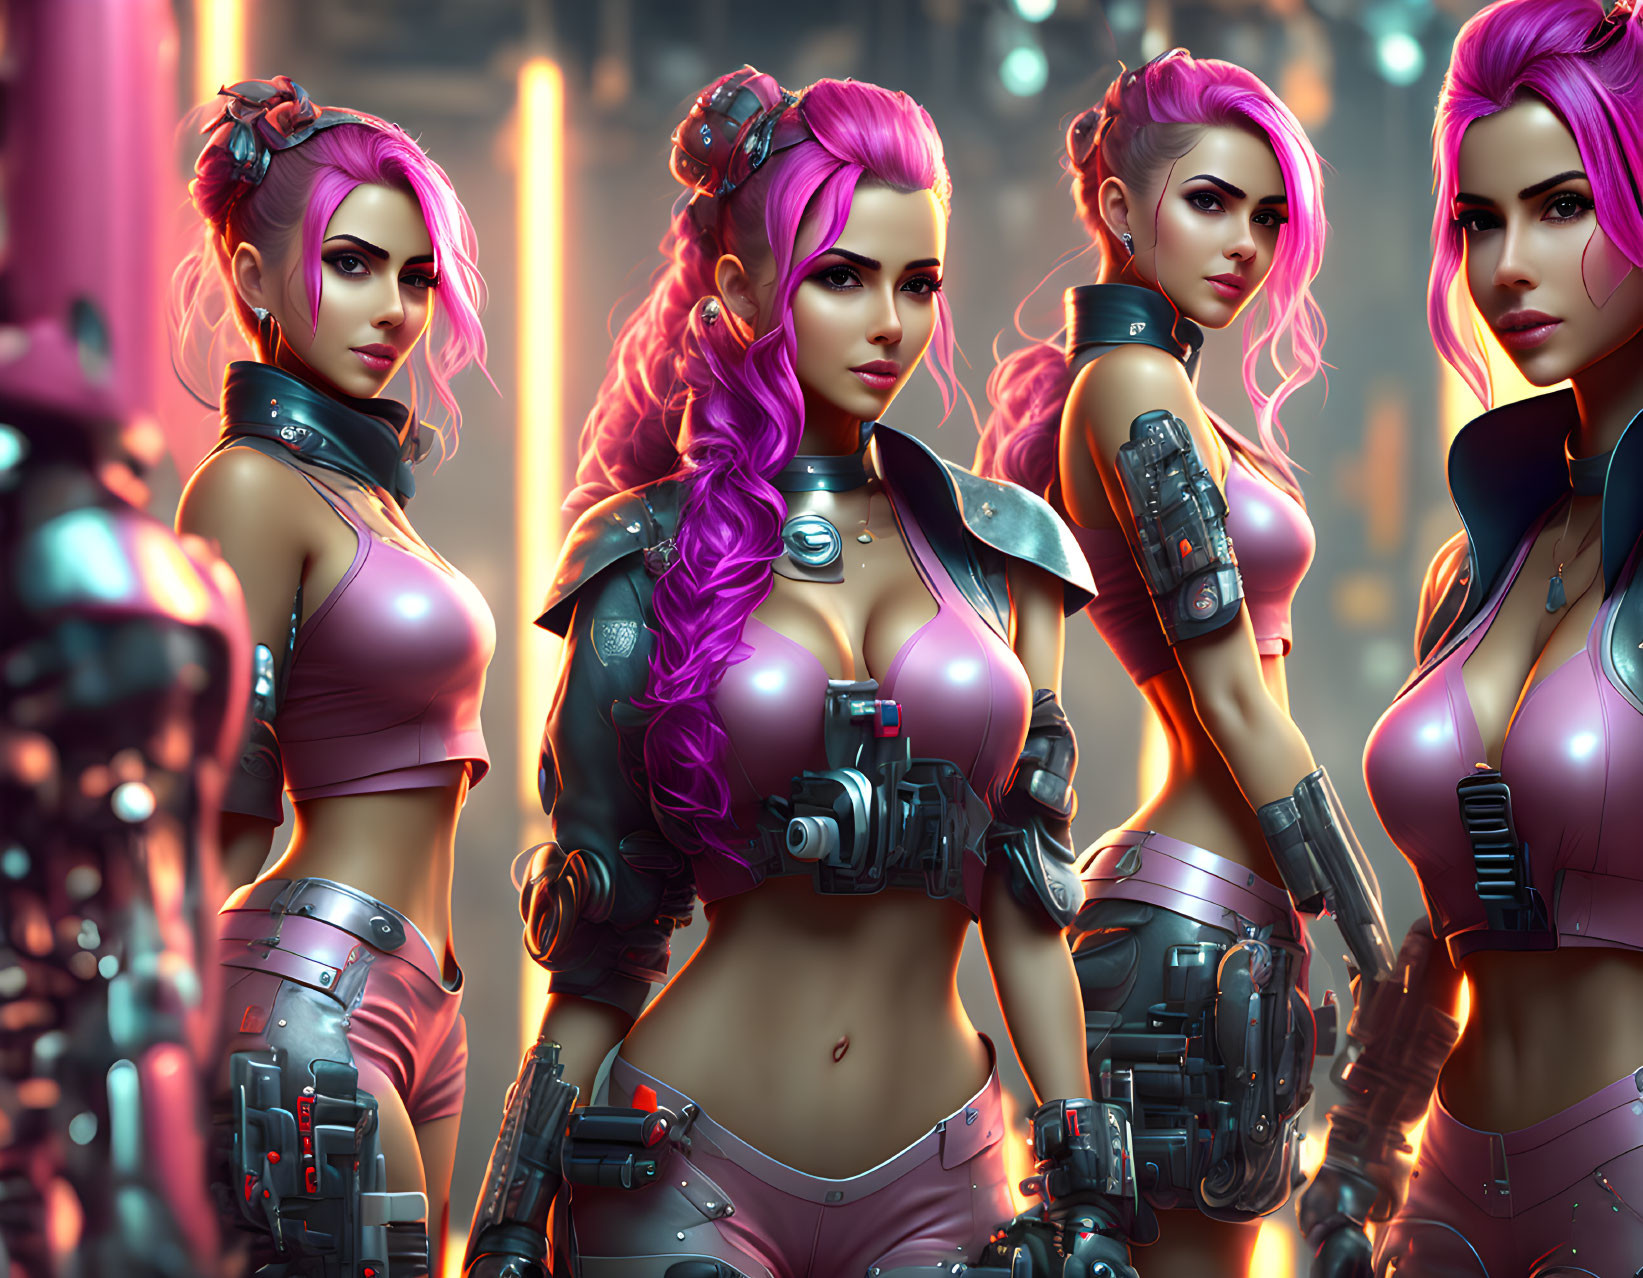 Four Female Characters with Pink Hair in Futuristic Armor in Neon-lit Setting